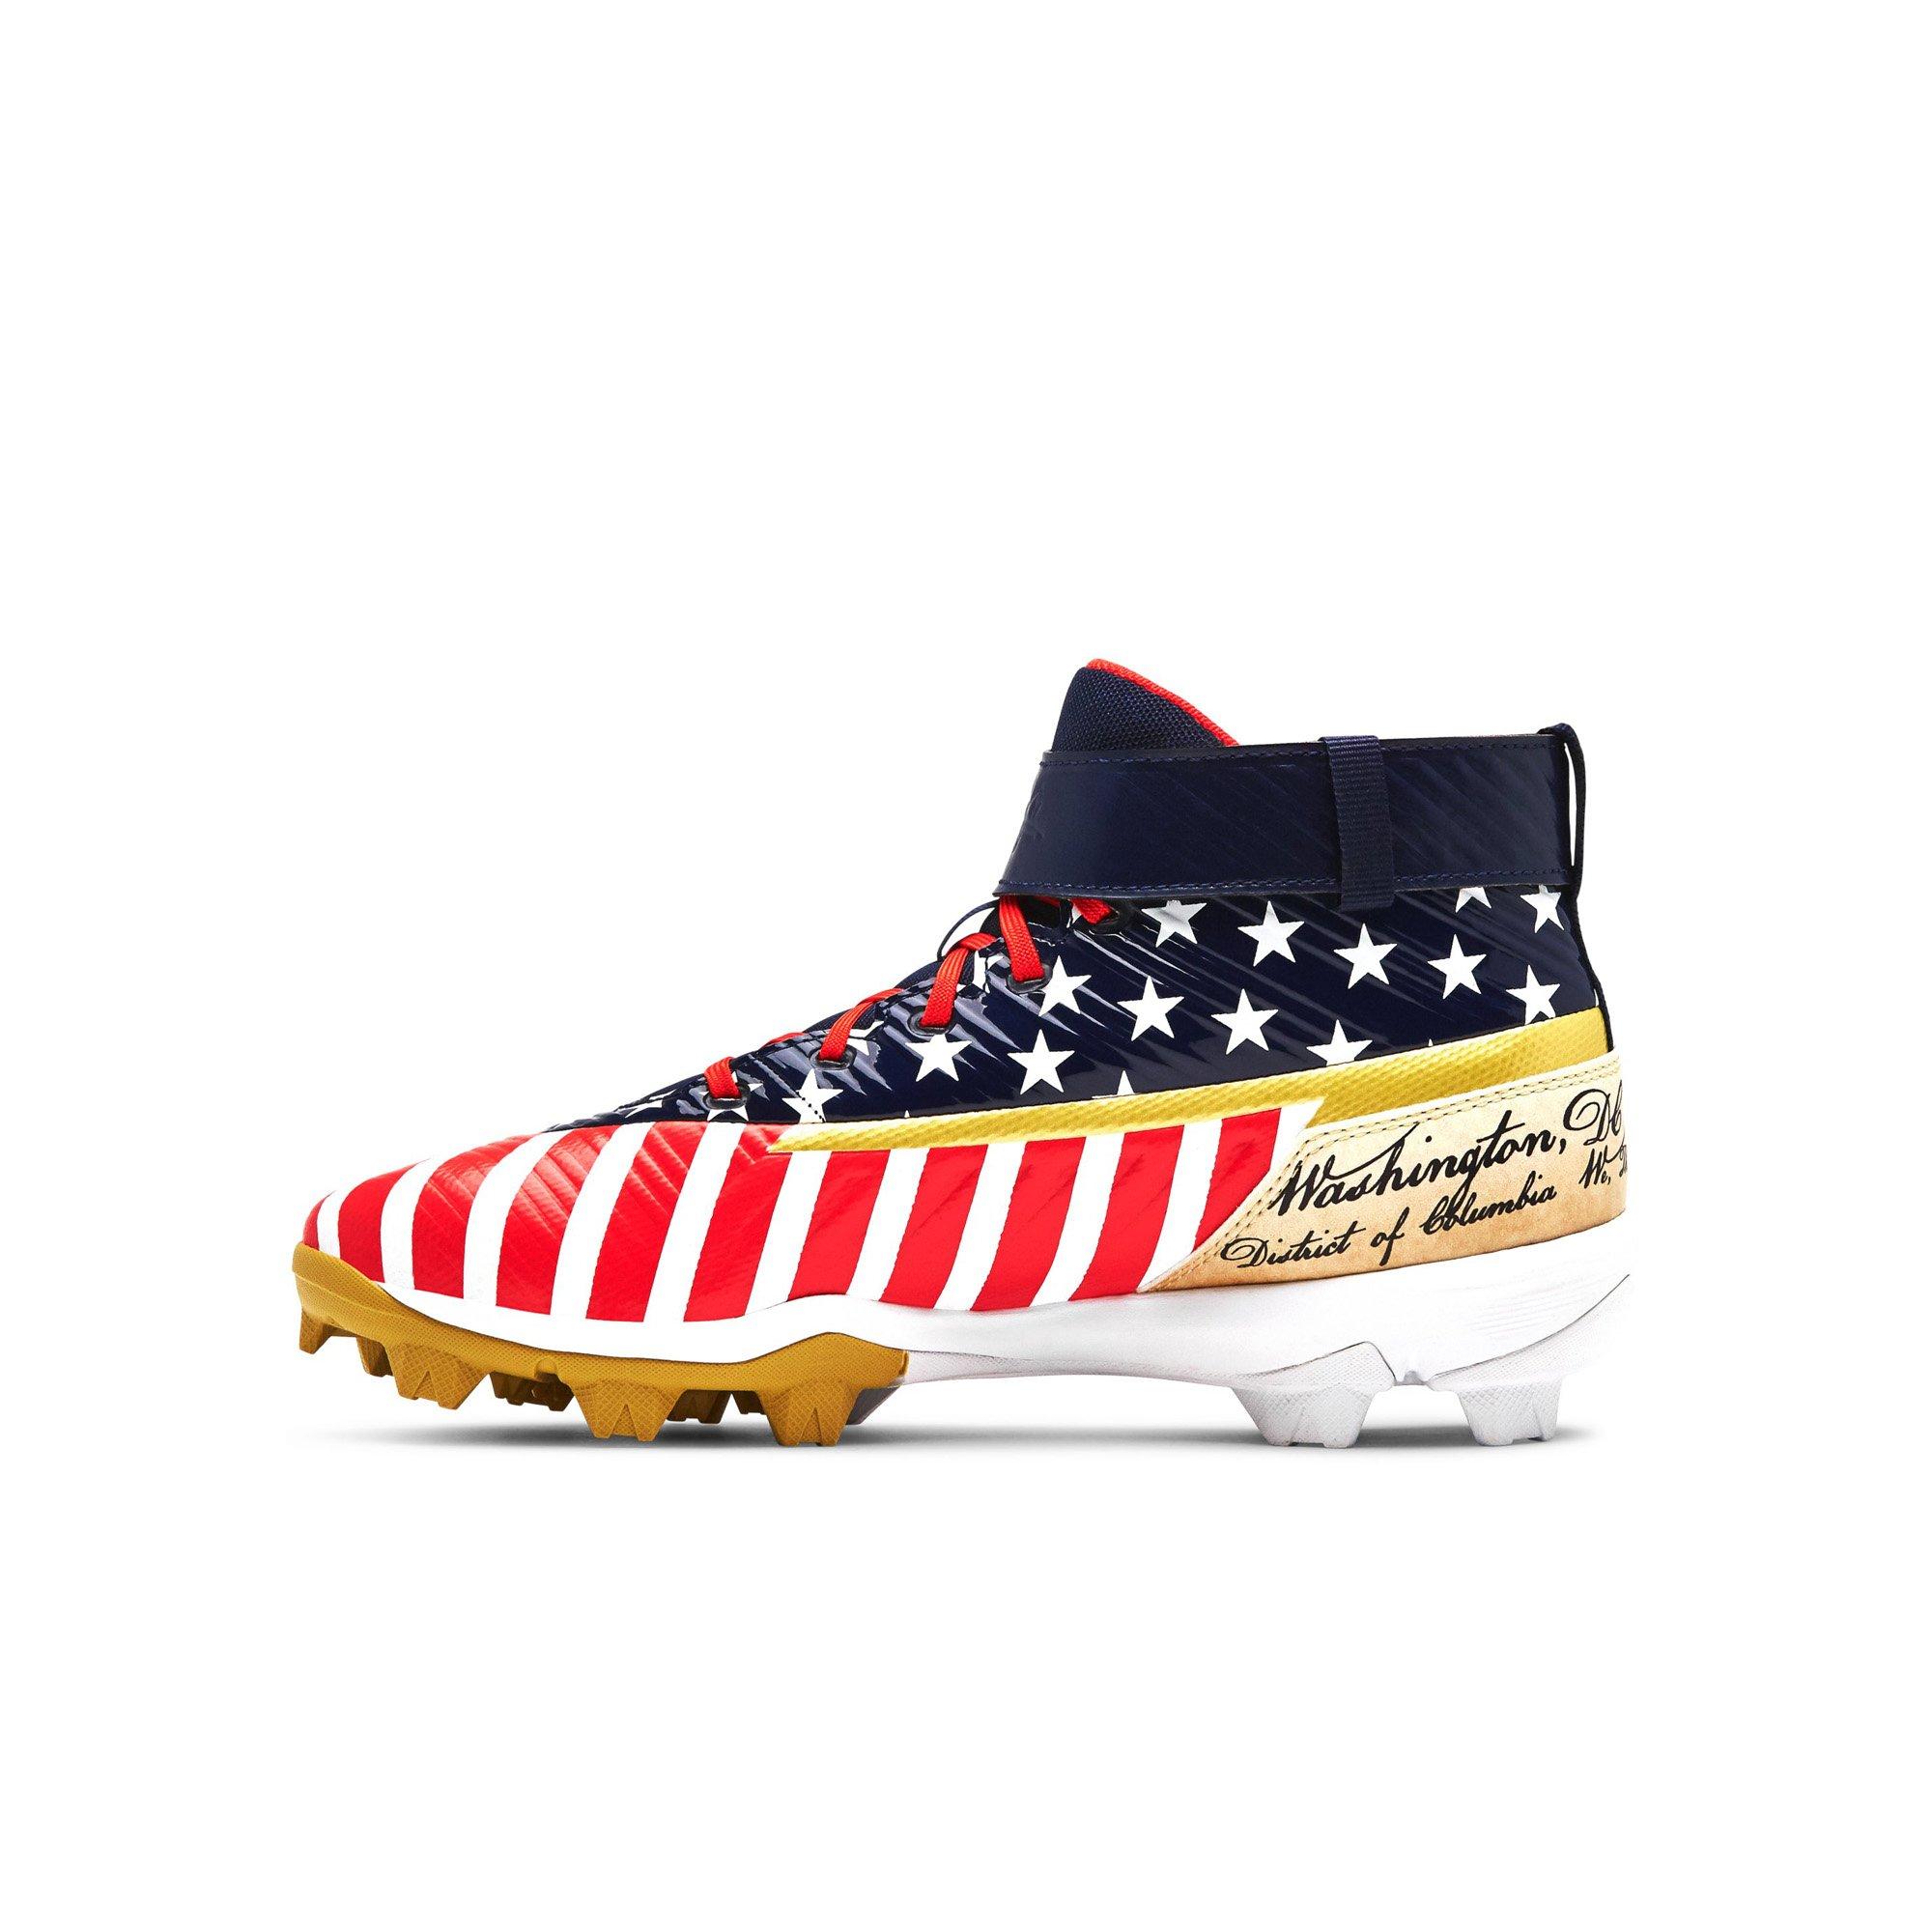 bryce harper cleats youth